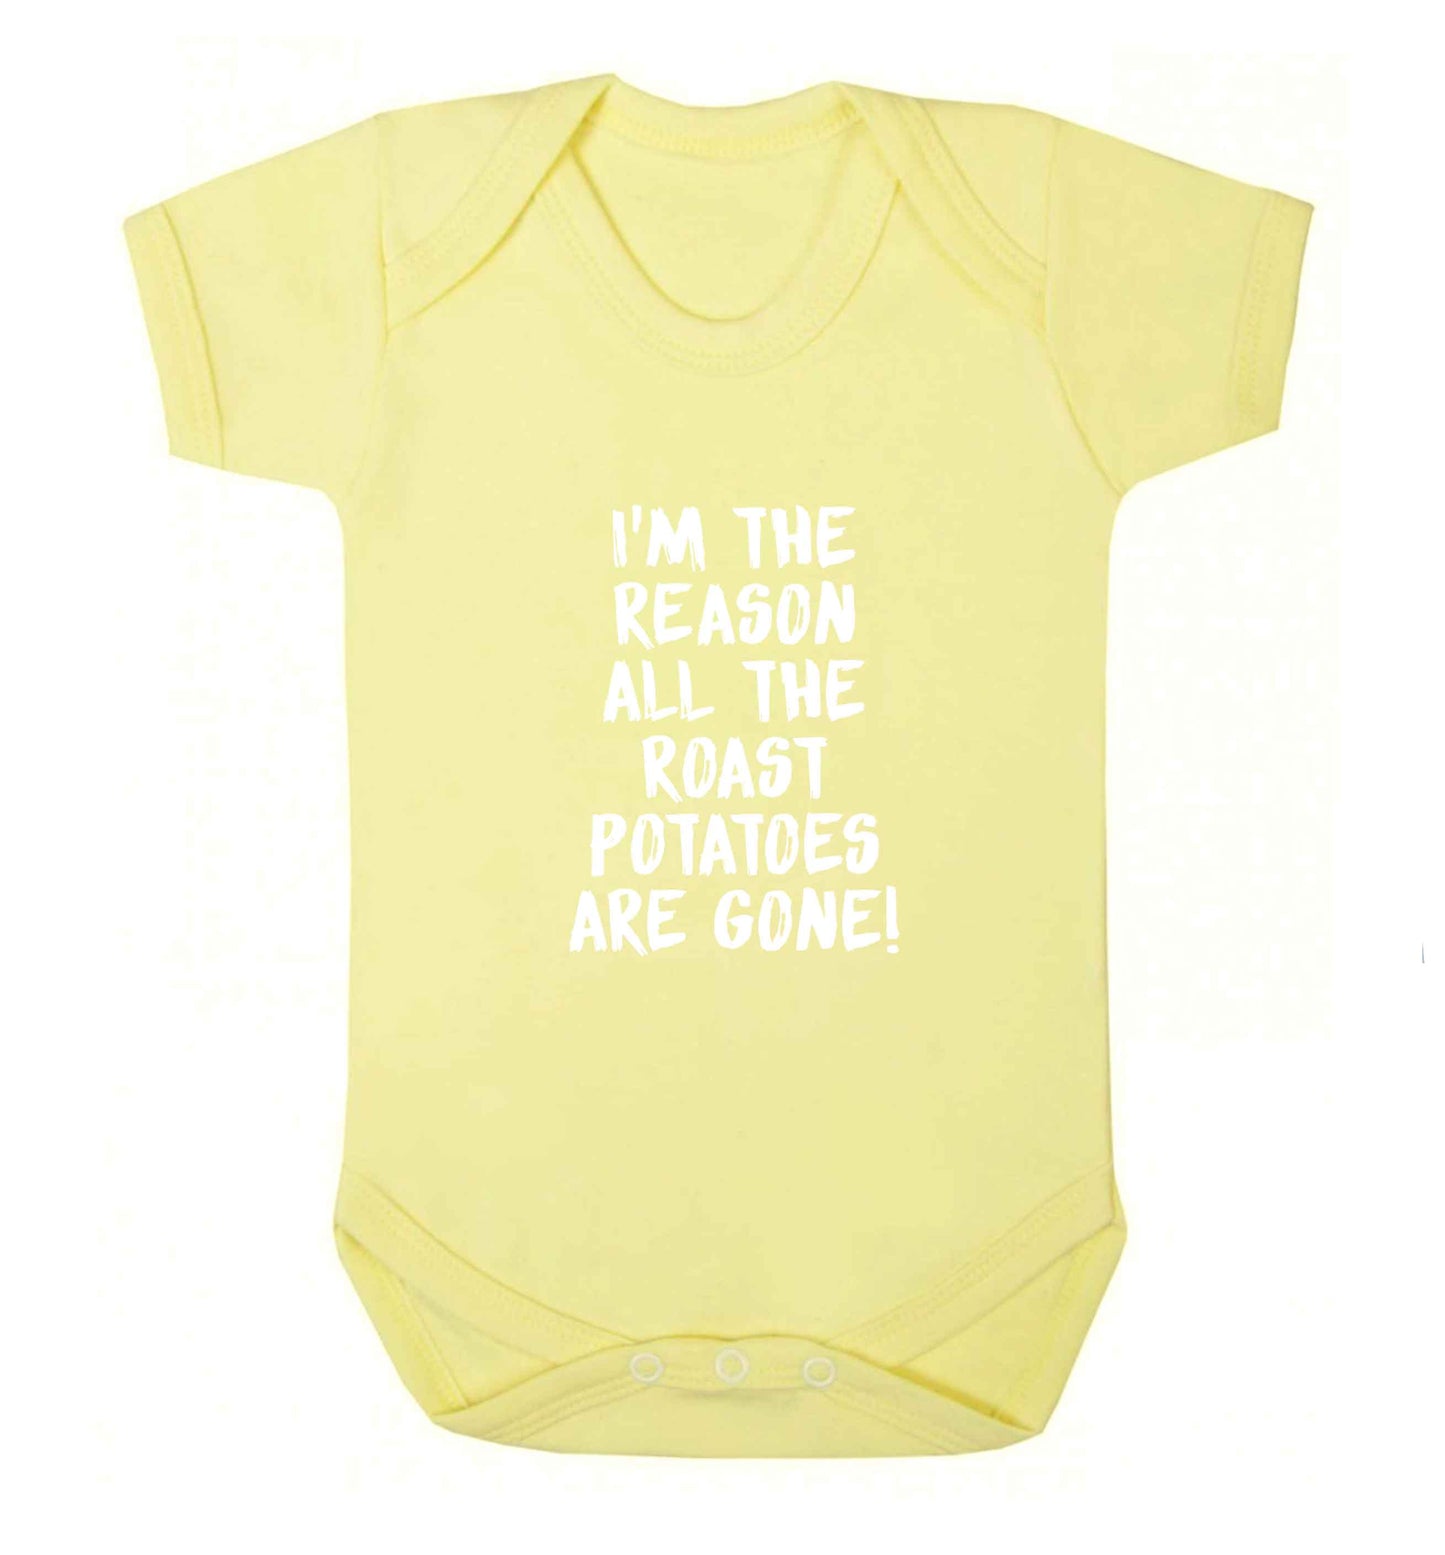 I'm the reason all the roast potatoes are gone baby vest pale yellow 18-24 months